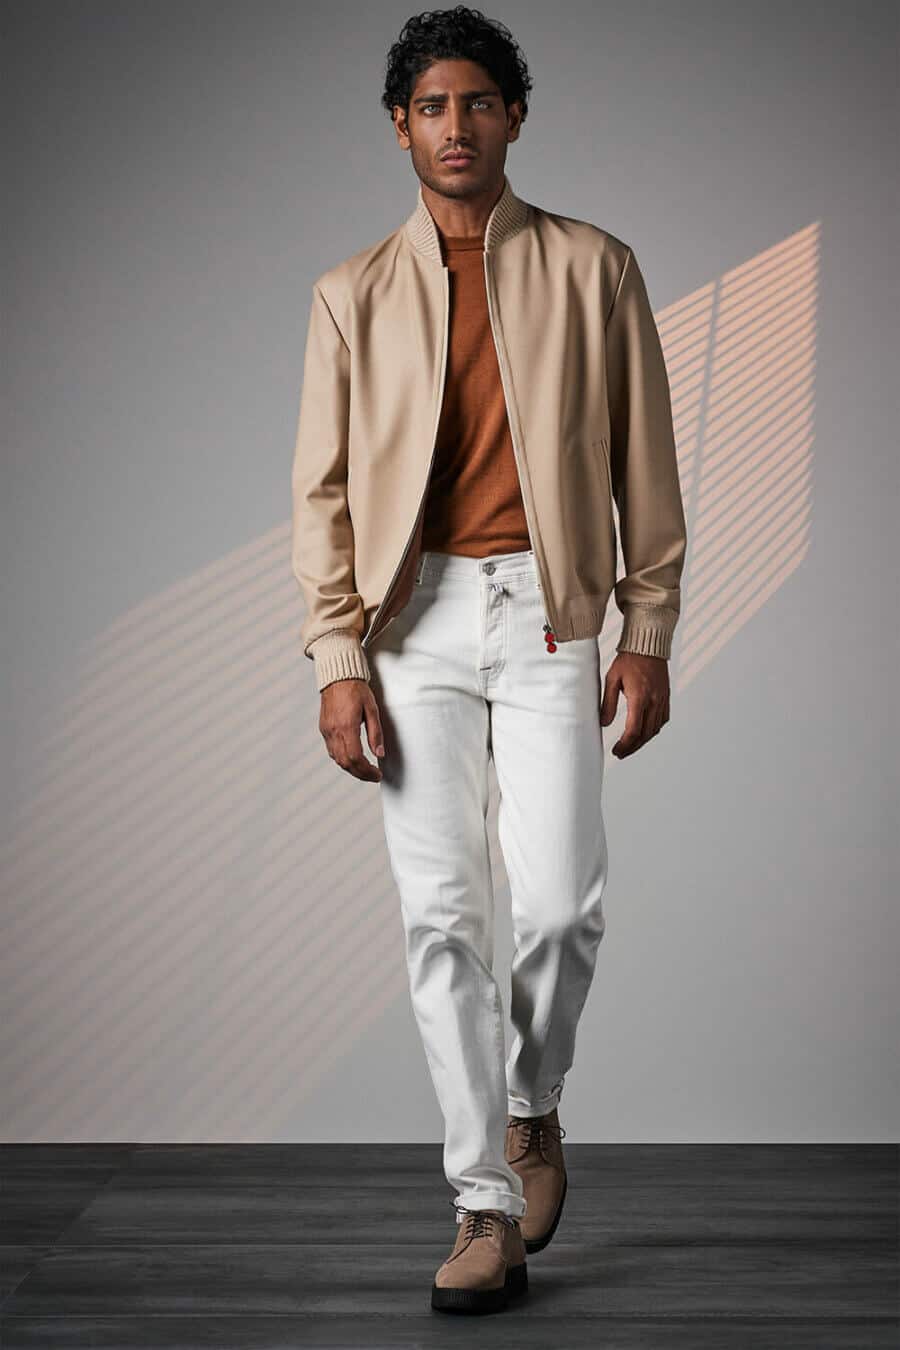 Men's white jeans, orange tee and beige bomber jacket outfit